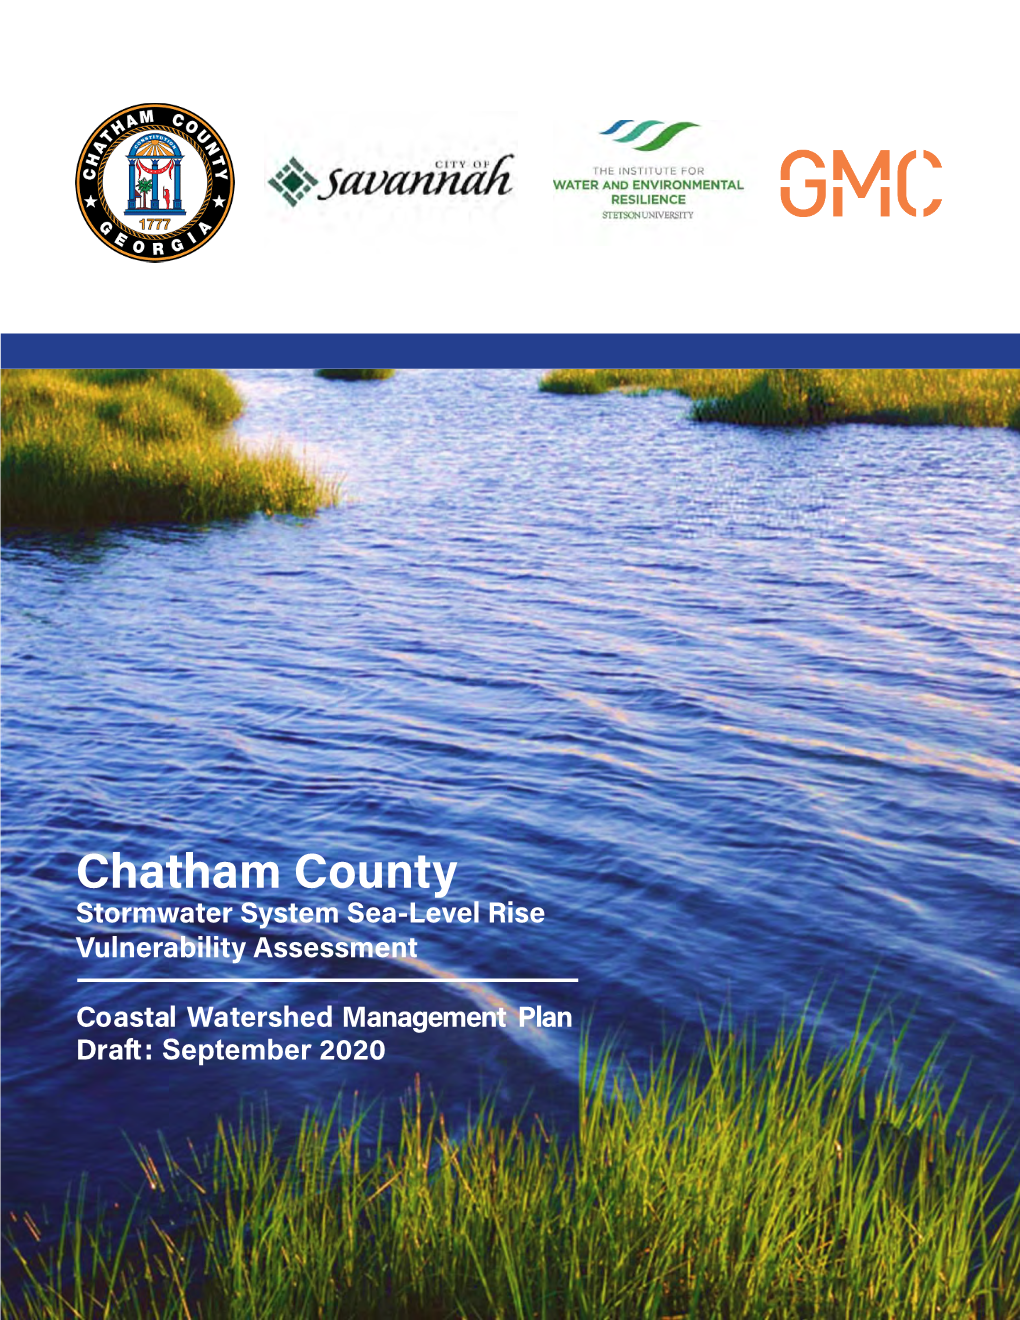 Chatham County Stormwater System Sea-Level Rise Vulnerability Assessment